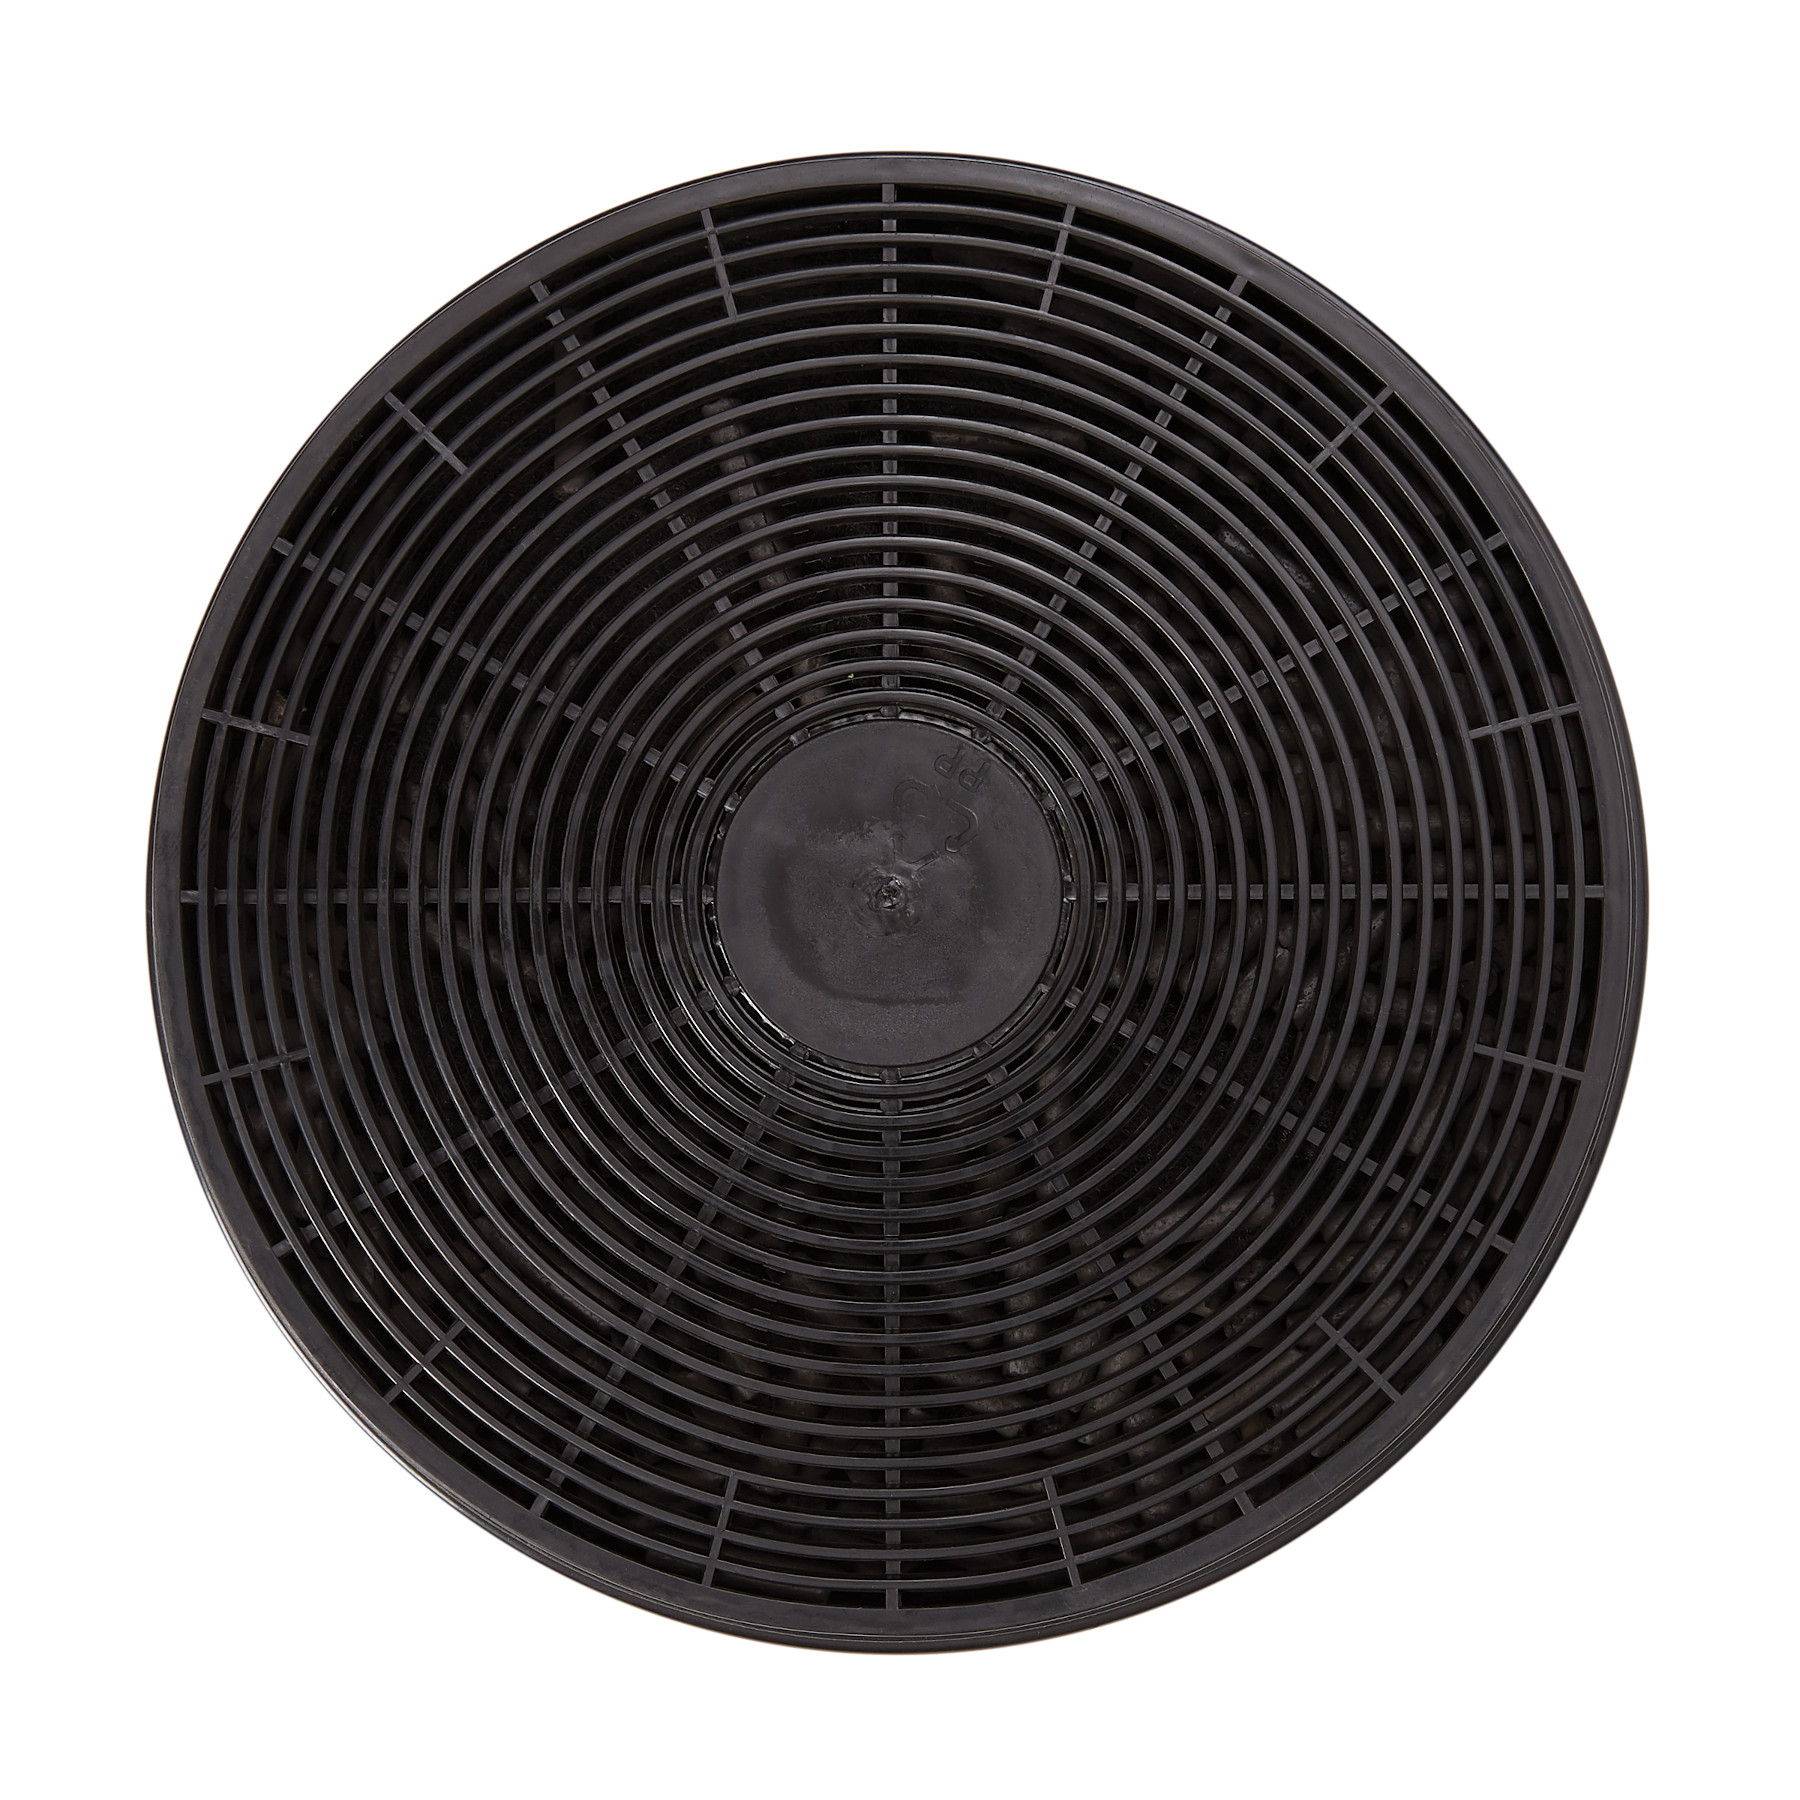 Charcoal replacement filter for use with Broan BWP, BWS and BWT series range hoods